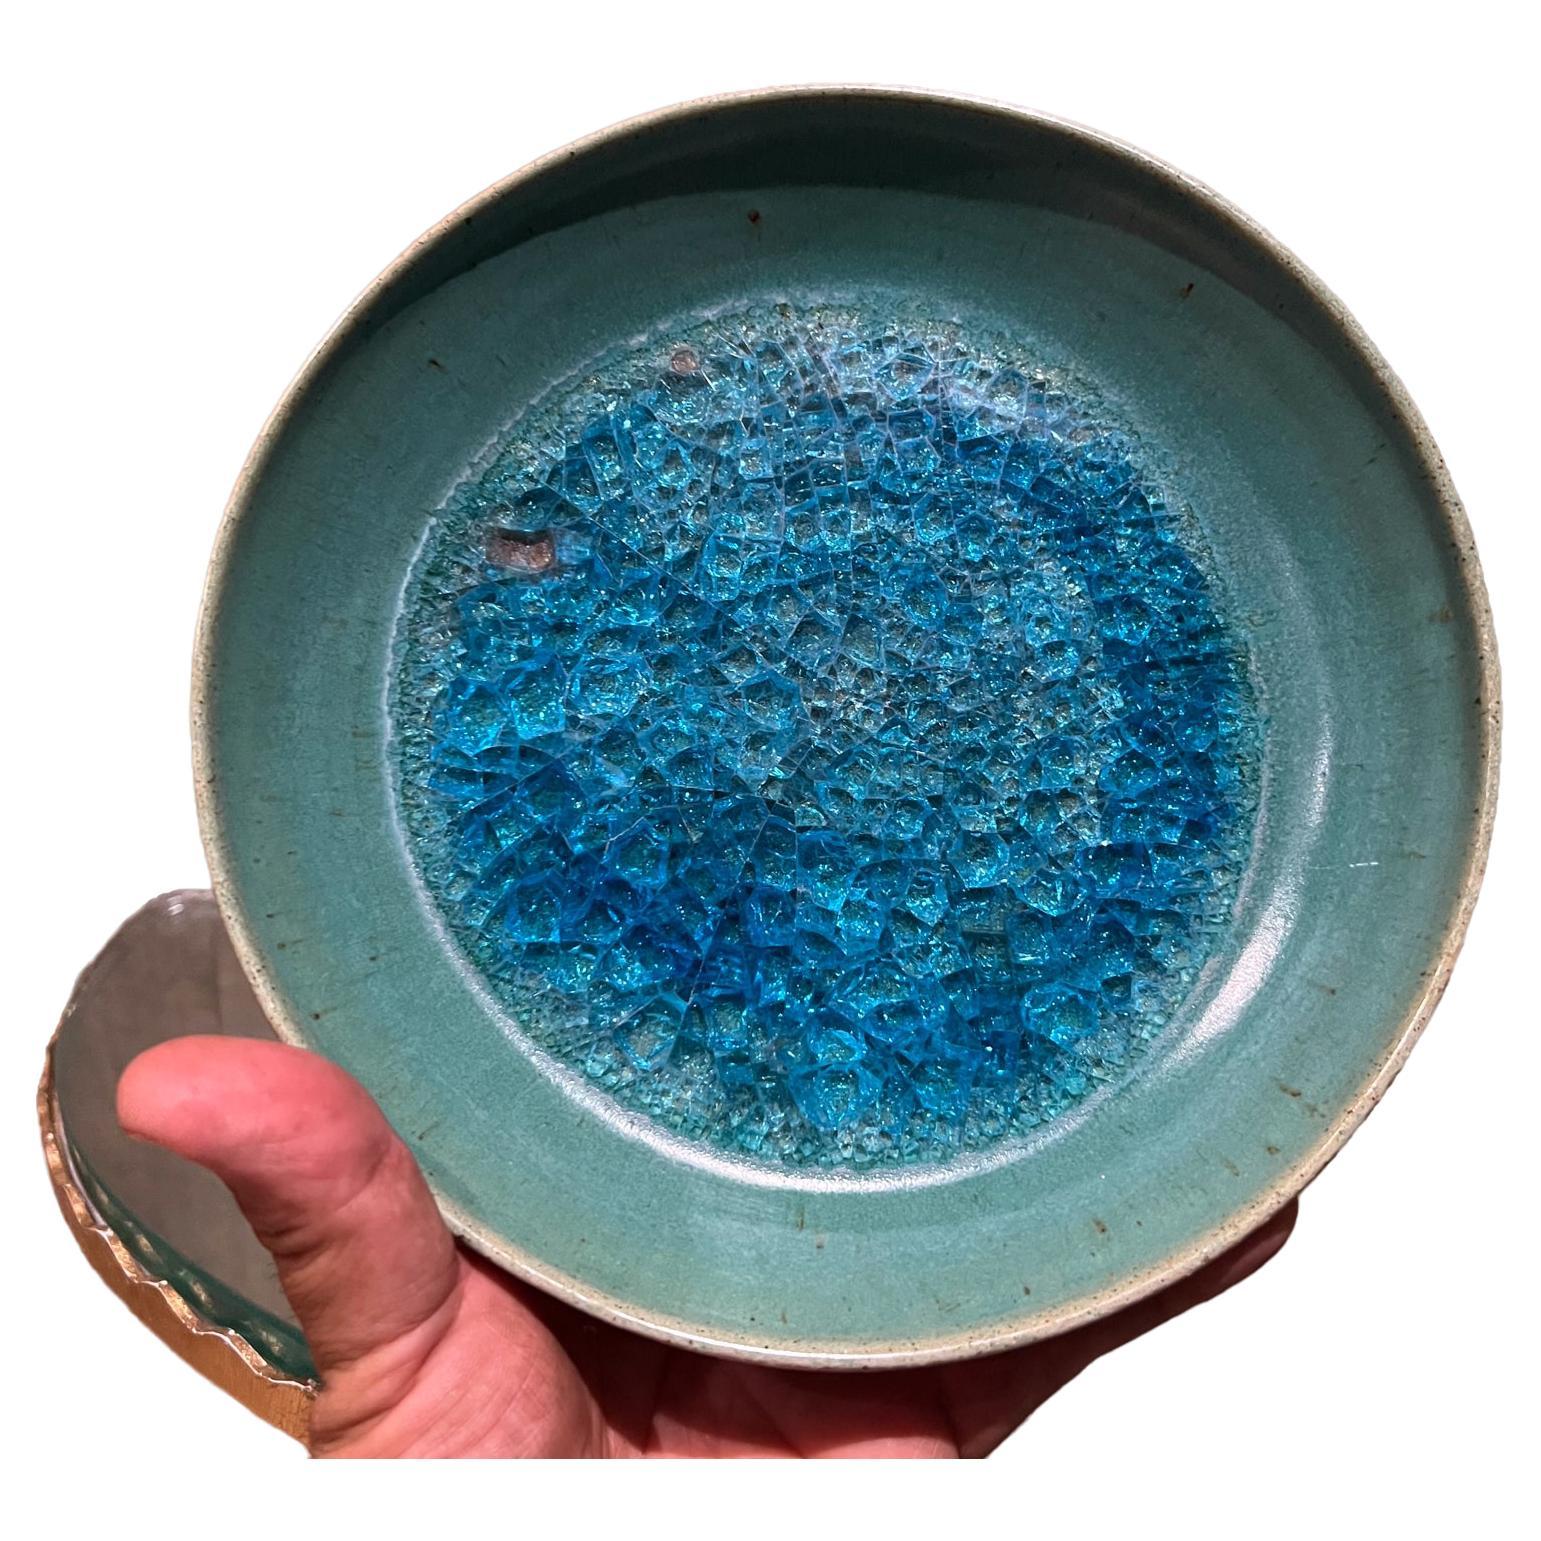 By renowned author and ceramicist, Jade Snow Wong, Decorative Dish Ceramic Pottery Art San Francisco, CA
circa 1955
Ceramic pottery with enamel glass inserts.
Hand signed and numbered
8 diameter x 1.25
Minor losses. One small center glass piece